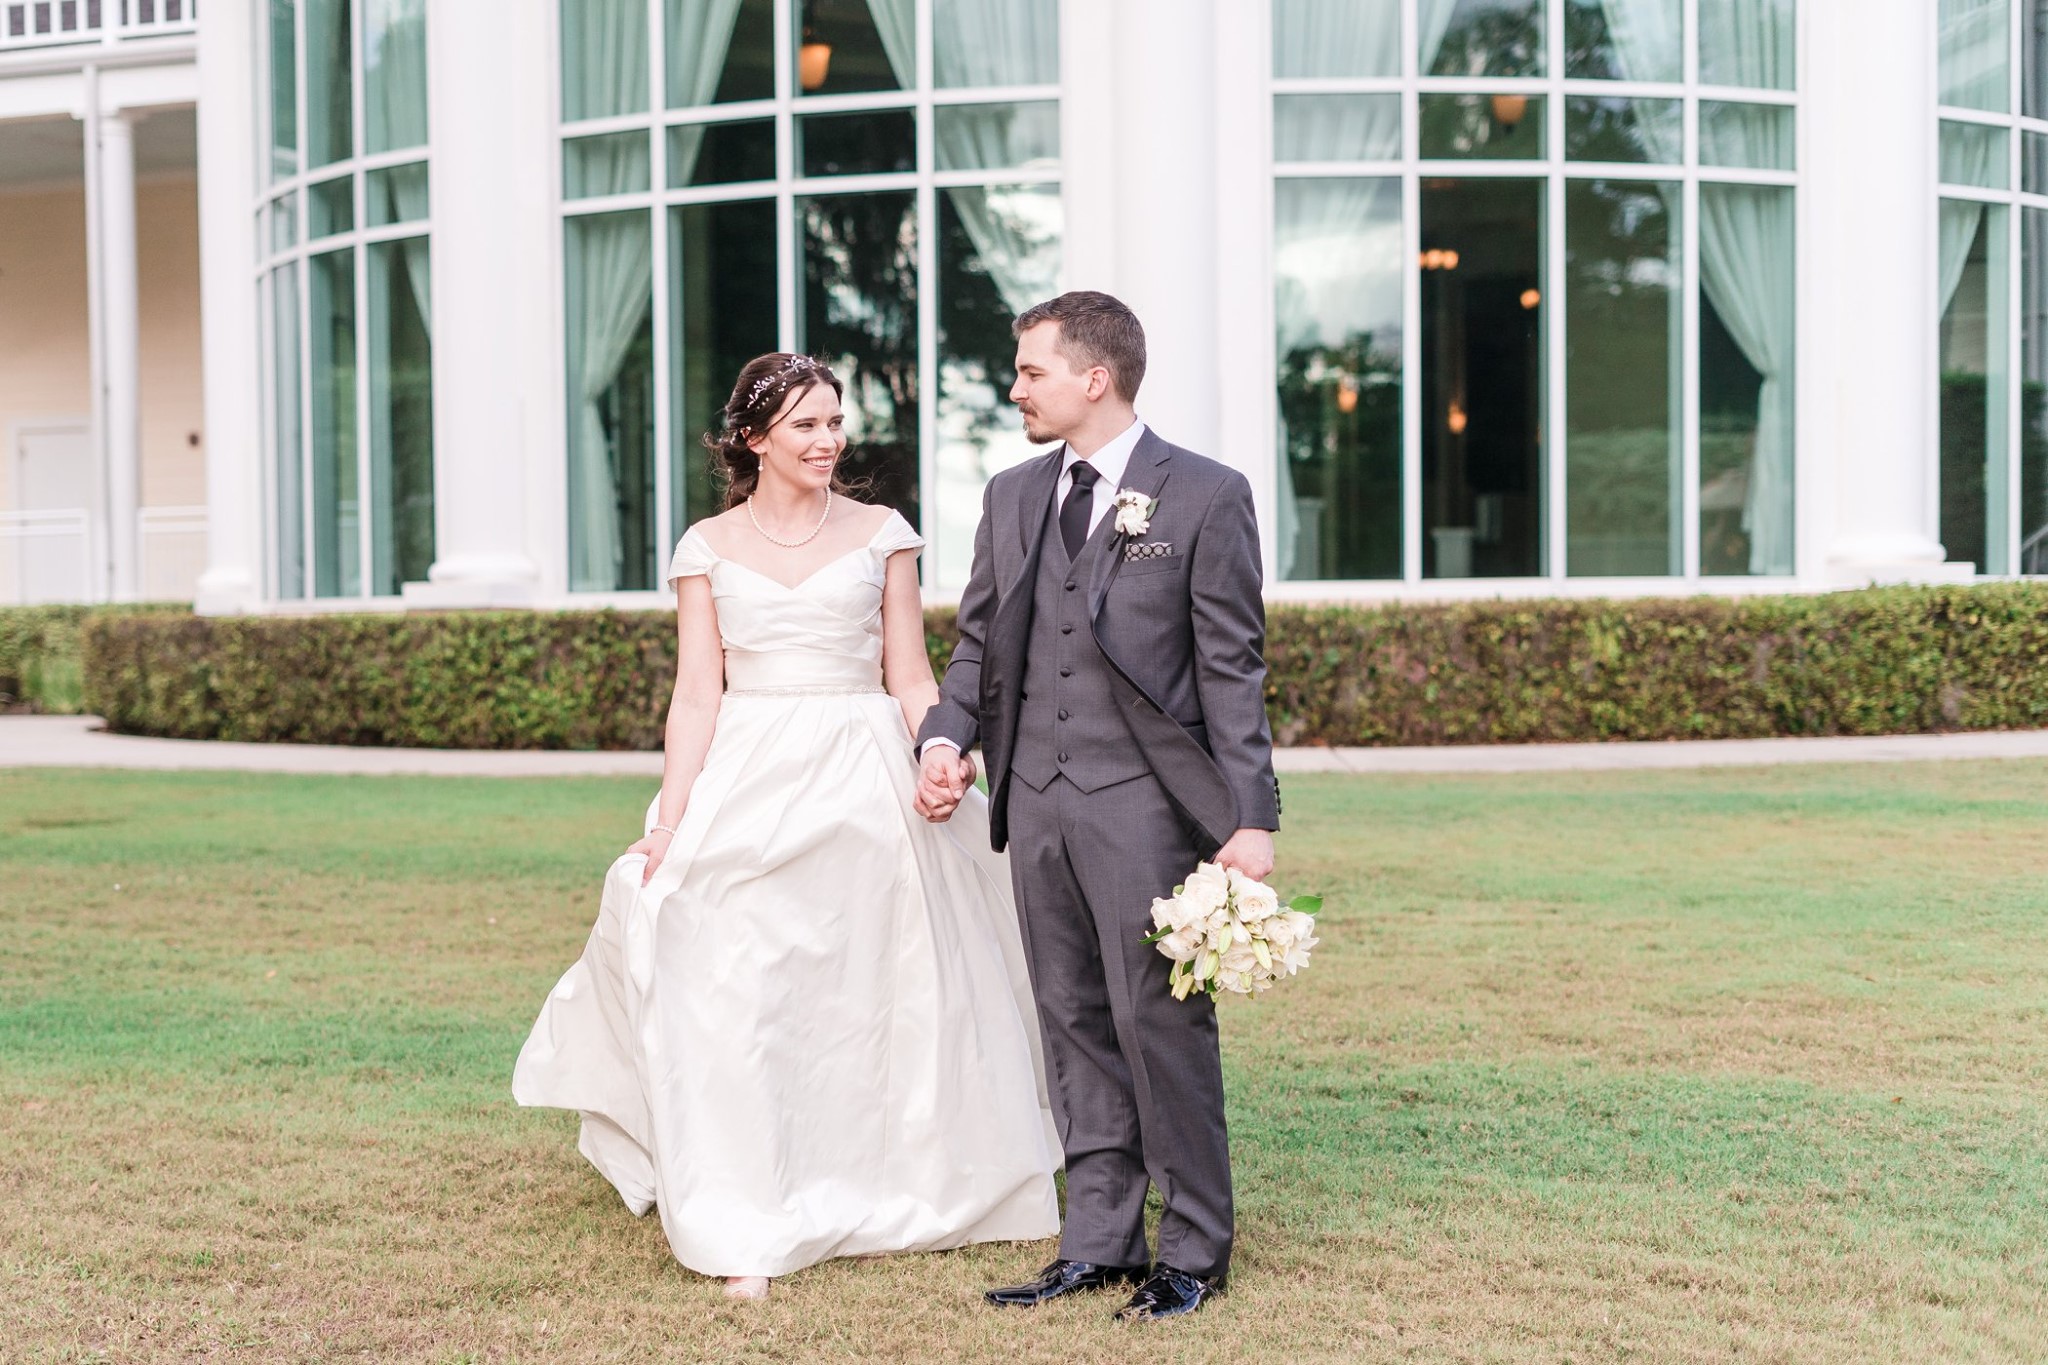 Orlando Wedding Planning Advice | Is a ‘First Look’ Right For You?